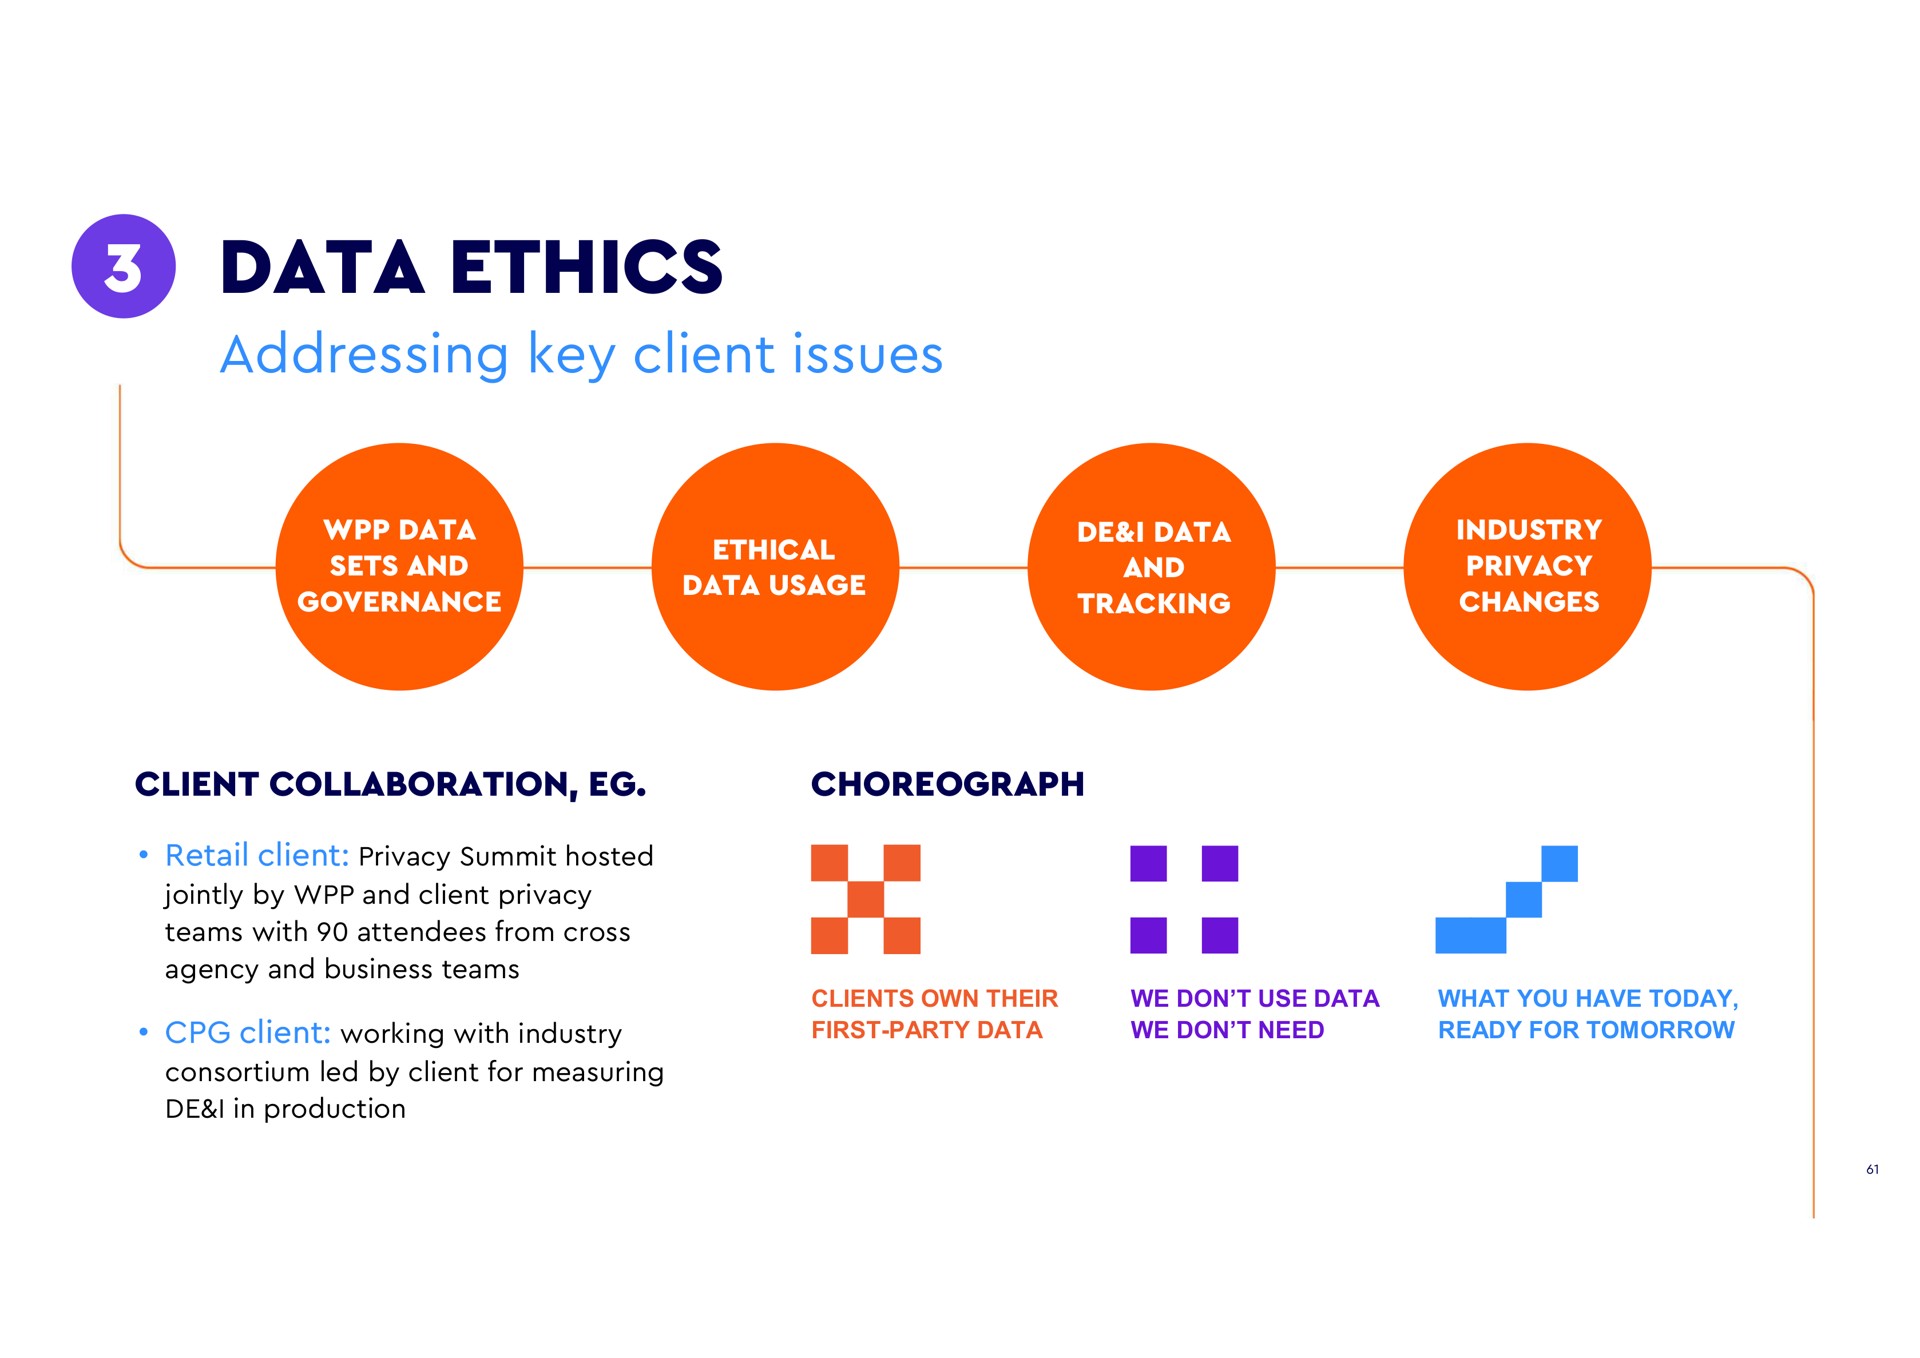 data ethics addressing key client issues sets and governance and tracking privacy changes client collaboration choreograph retail client privacy summit hosted jointly by and client privacy teams with from cross agency and business teams client working with industry consortium led by client for measuring in production i a clients own their first party we don use we don need what you have today ready for tomorrow | WPP